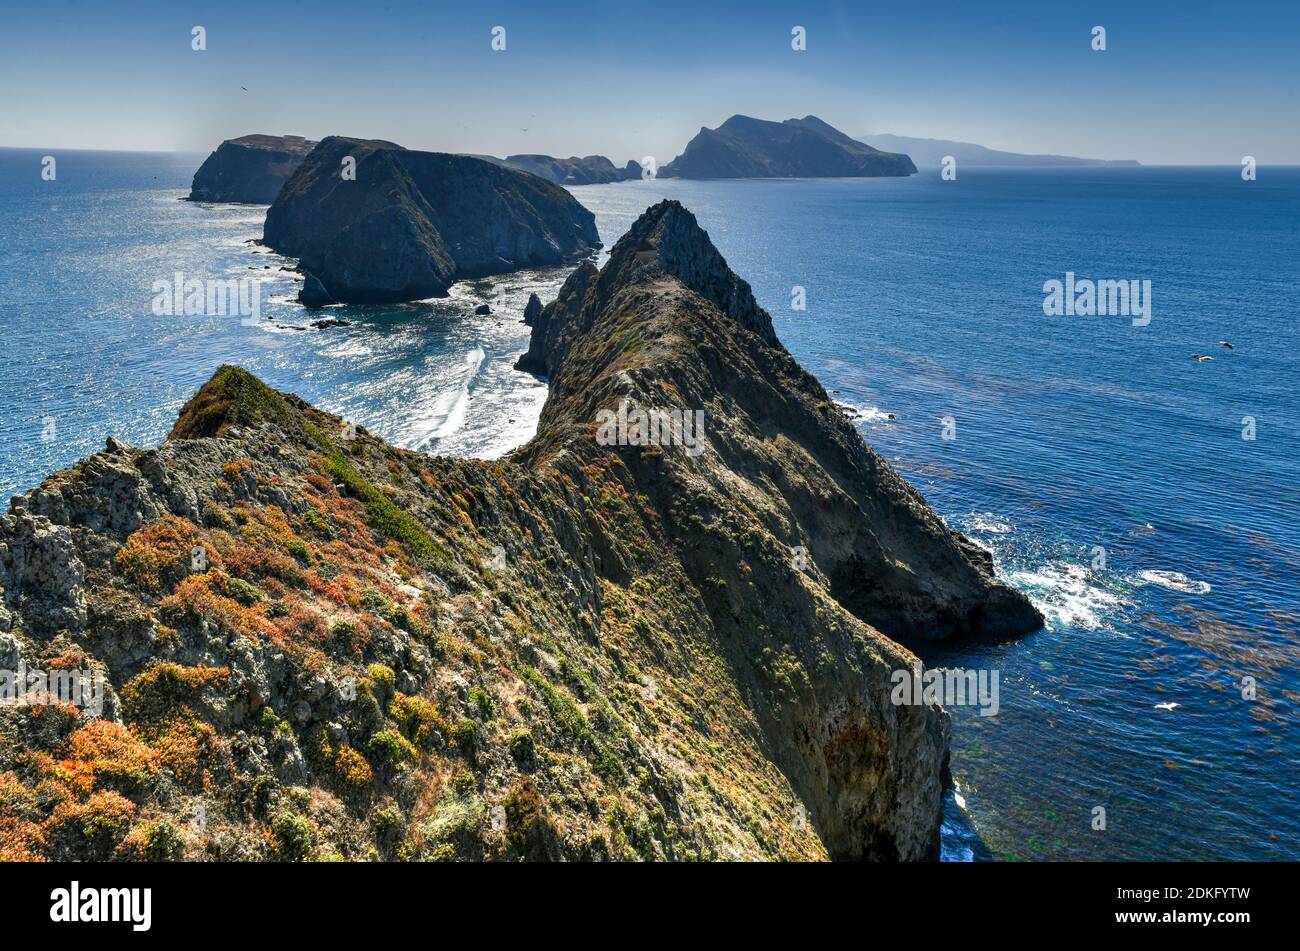 View from Inspiration Point, Anacapa island, California in Channel Islands National Park. Stock Photo